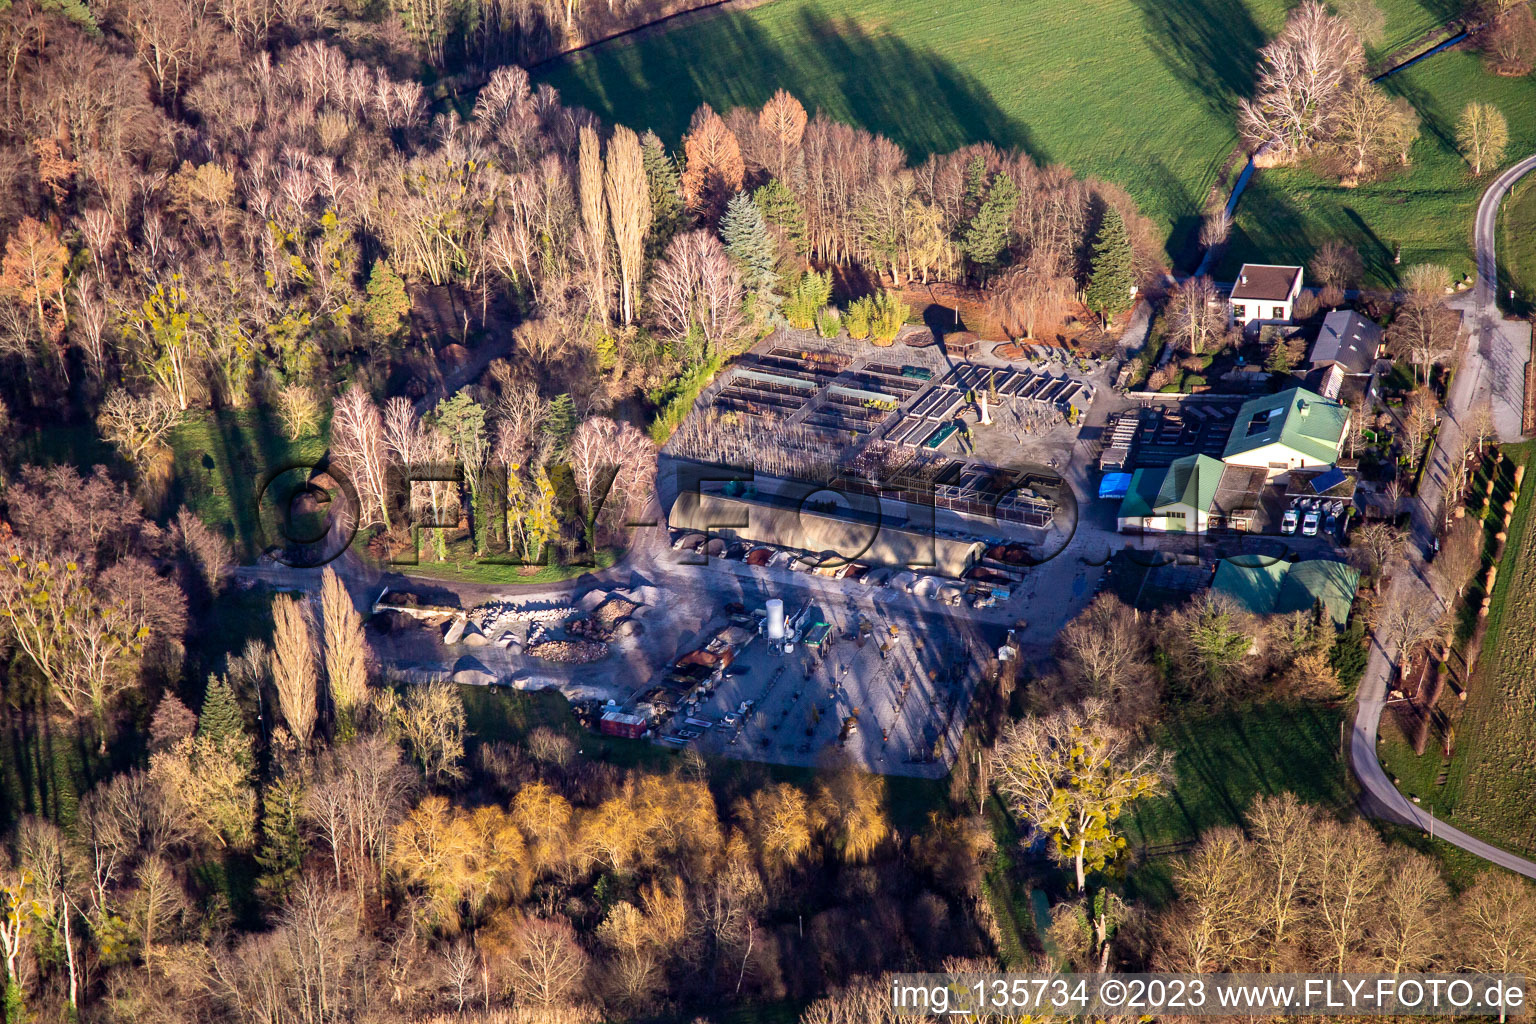 Aerial photograpy of Bienwald tree nursery in Berg in the state Rhineland-Palatinate, Germany